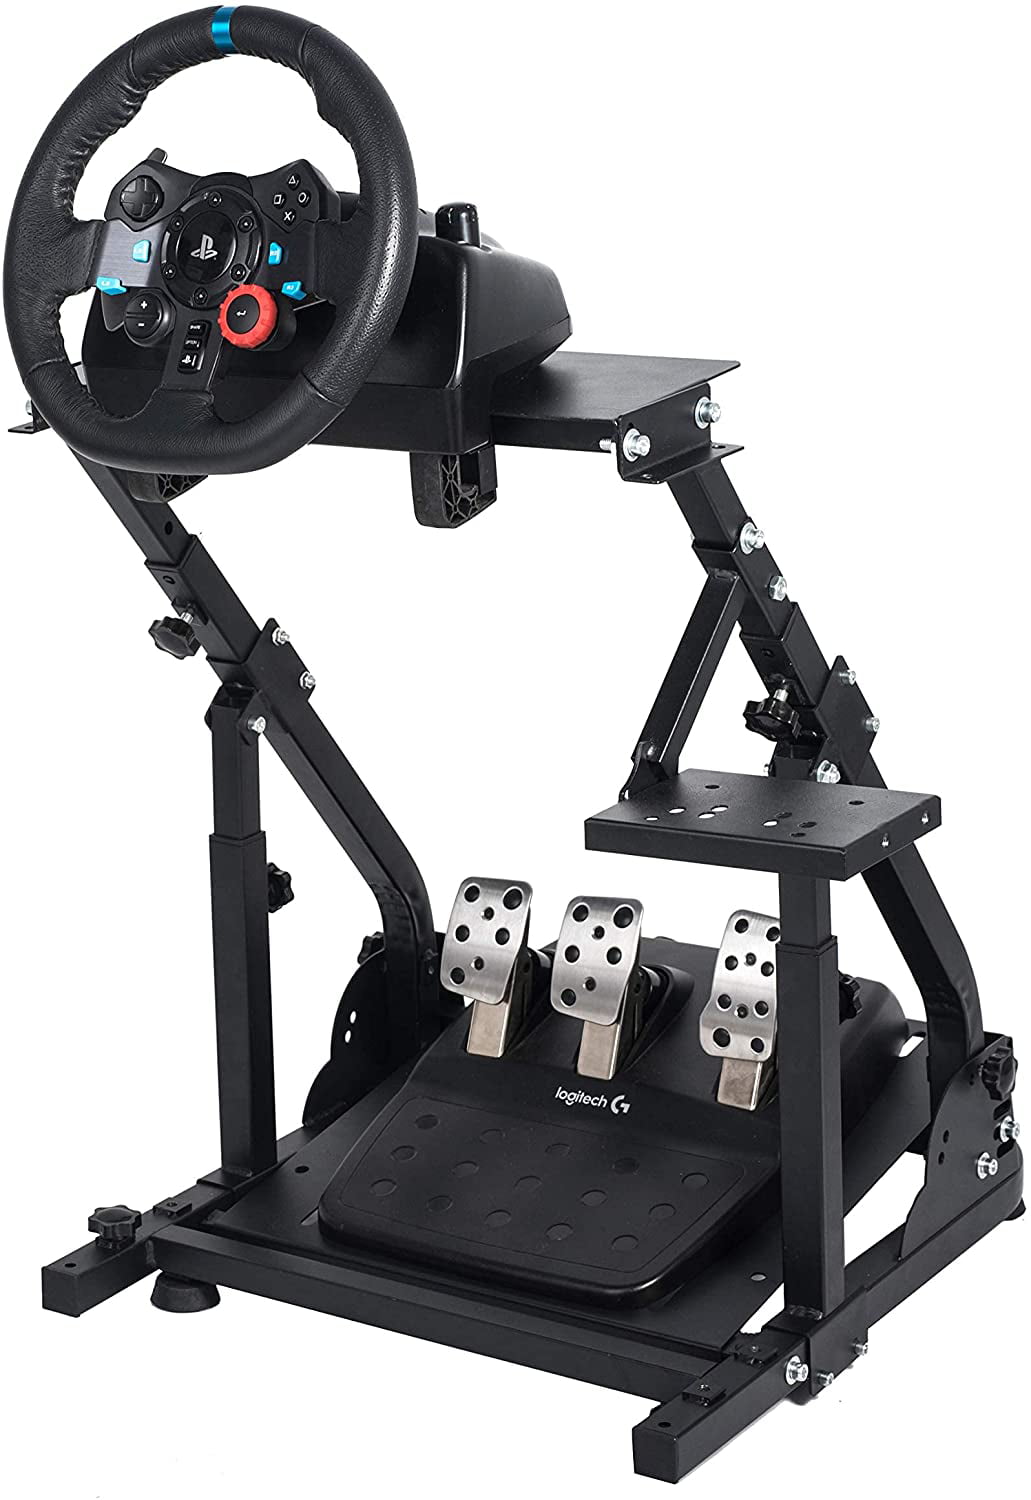 Slendor Racing Steering Wheel Stand for Logitech G920, G25, G27, G29 Wheel,  Gaming Wheel Stand Driving Simulator Cockpit Pedal and Shifters Not